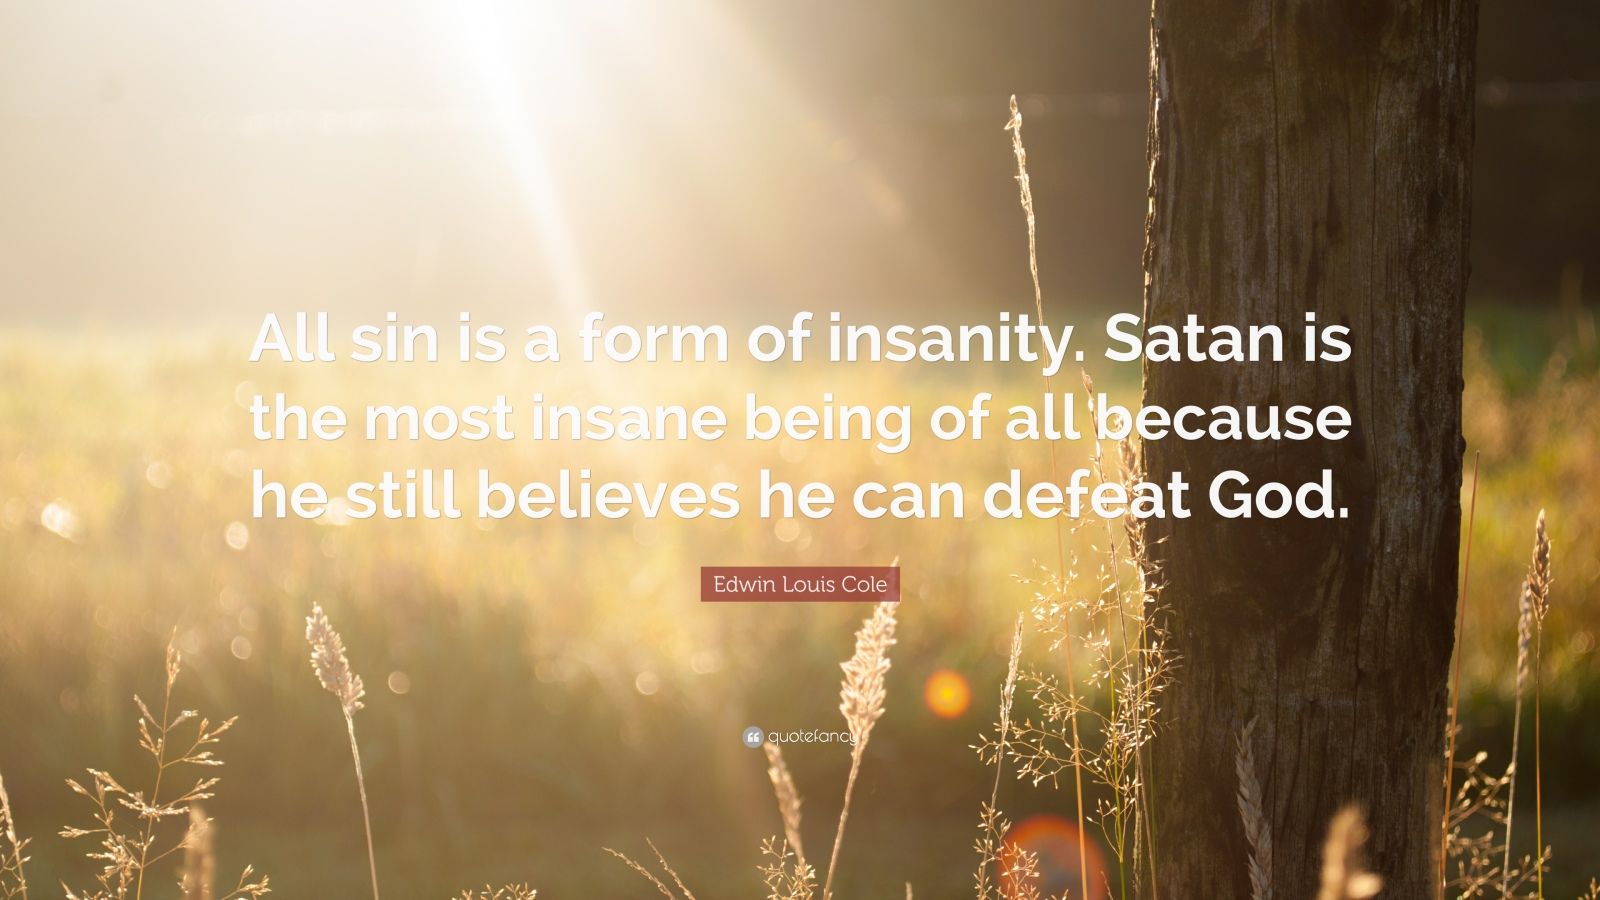 satan is the most insane being of all because he still believes